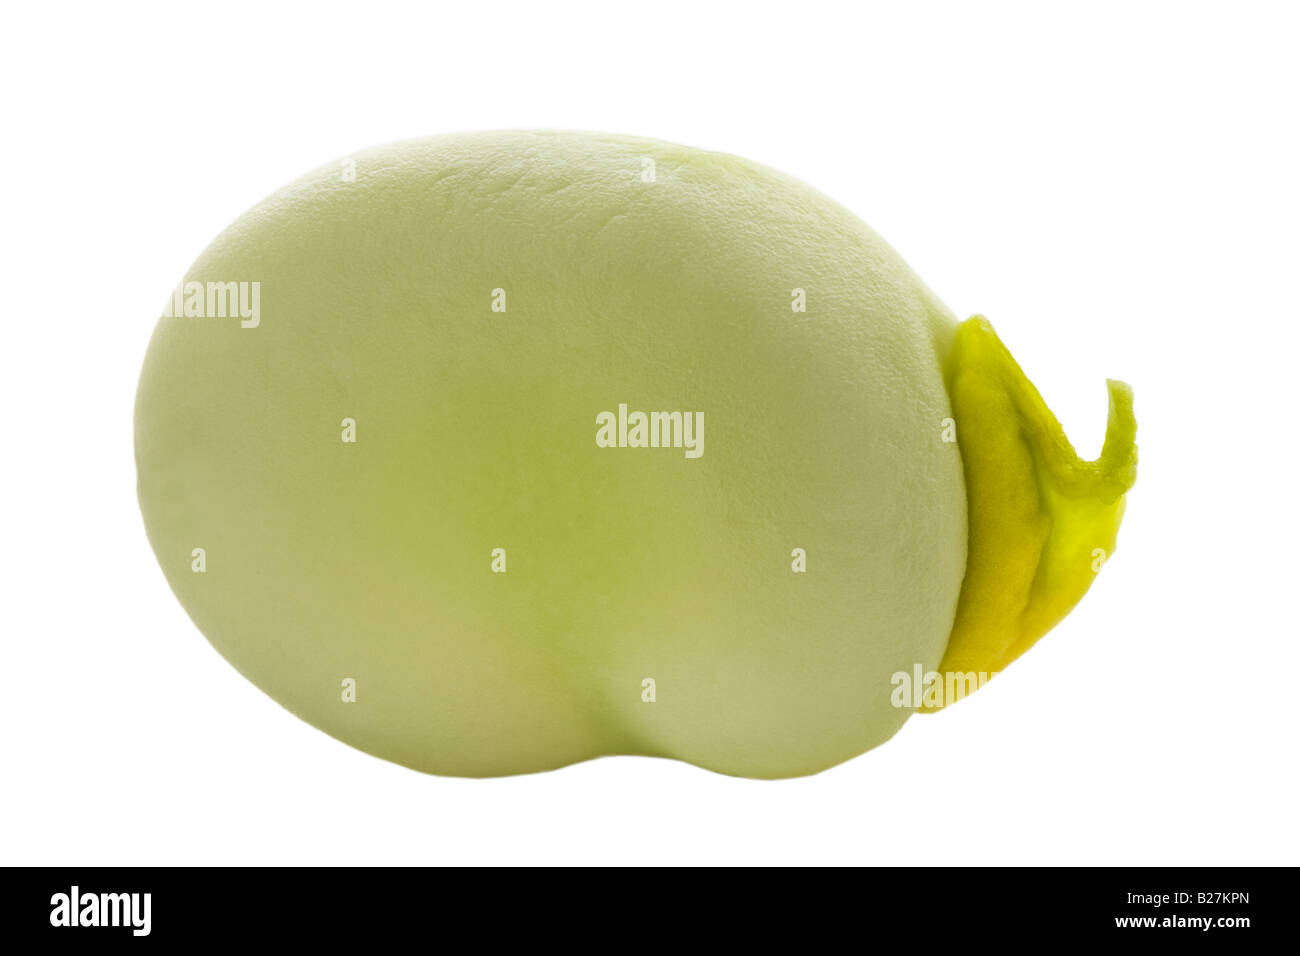 A Macro Image of a Home Grown Ripe Broad Bean, Against a White Background. Stock Photo